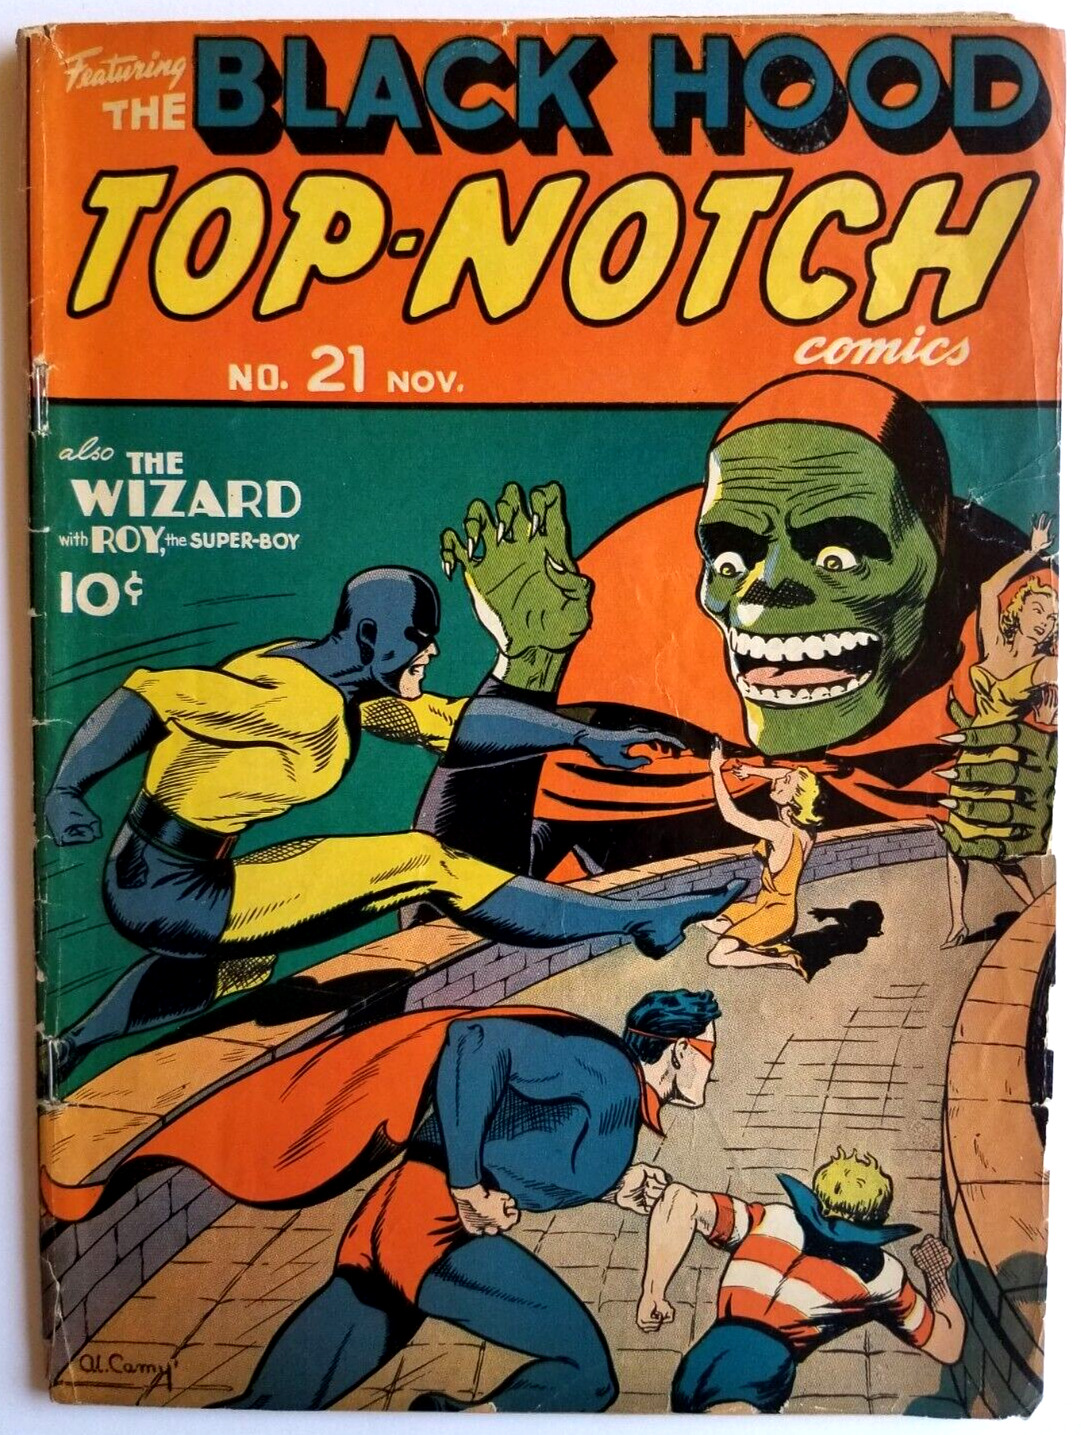 TOP-NOTCH COMICS #21 GVG 3.0 (A) (MLJ 1941) SCARCE ONLY 14 ON CENSUS